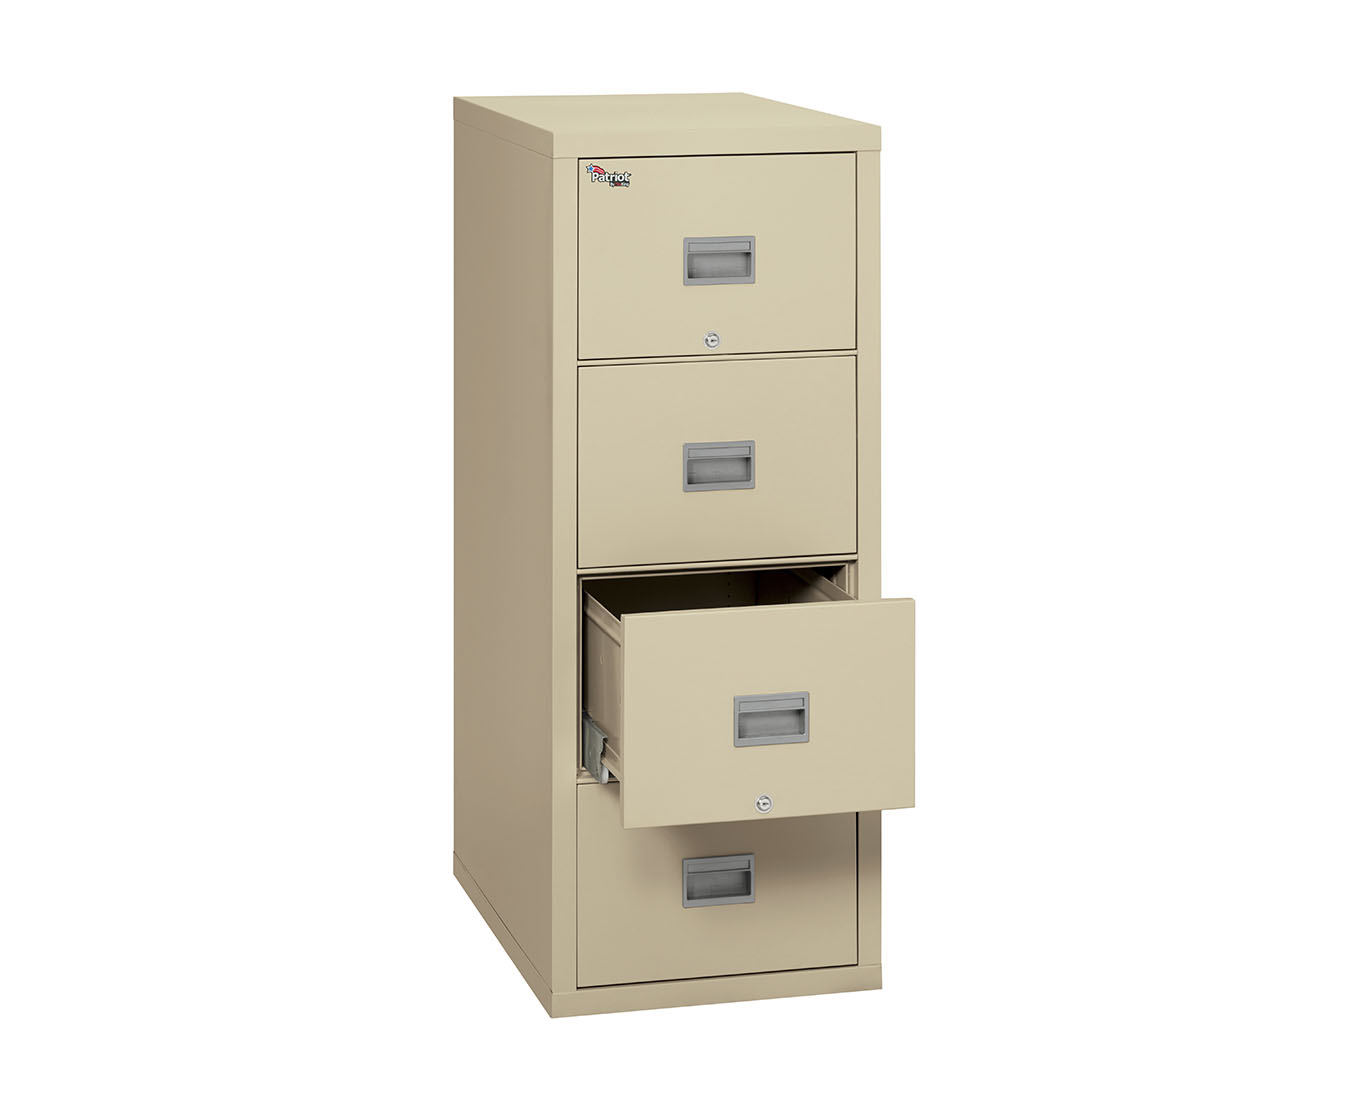 Patriot Vertical File Cabinets Fireking Security Group intended for measurements 1366 X 1110